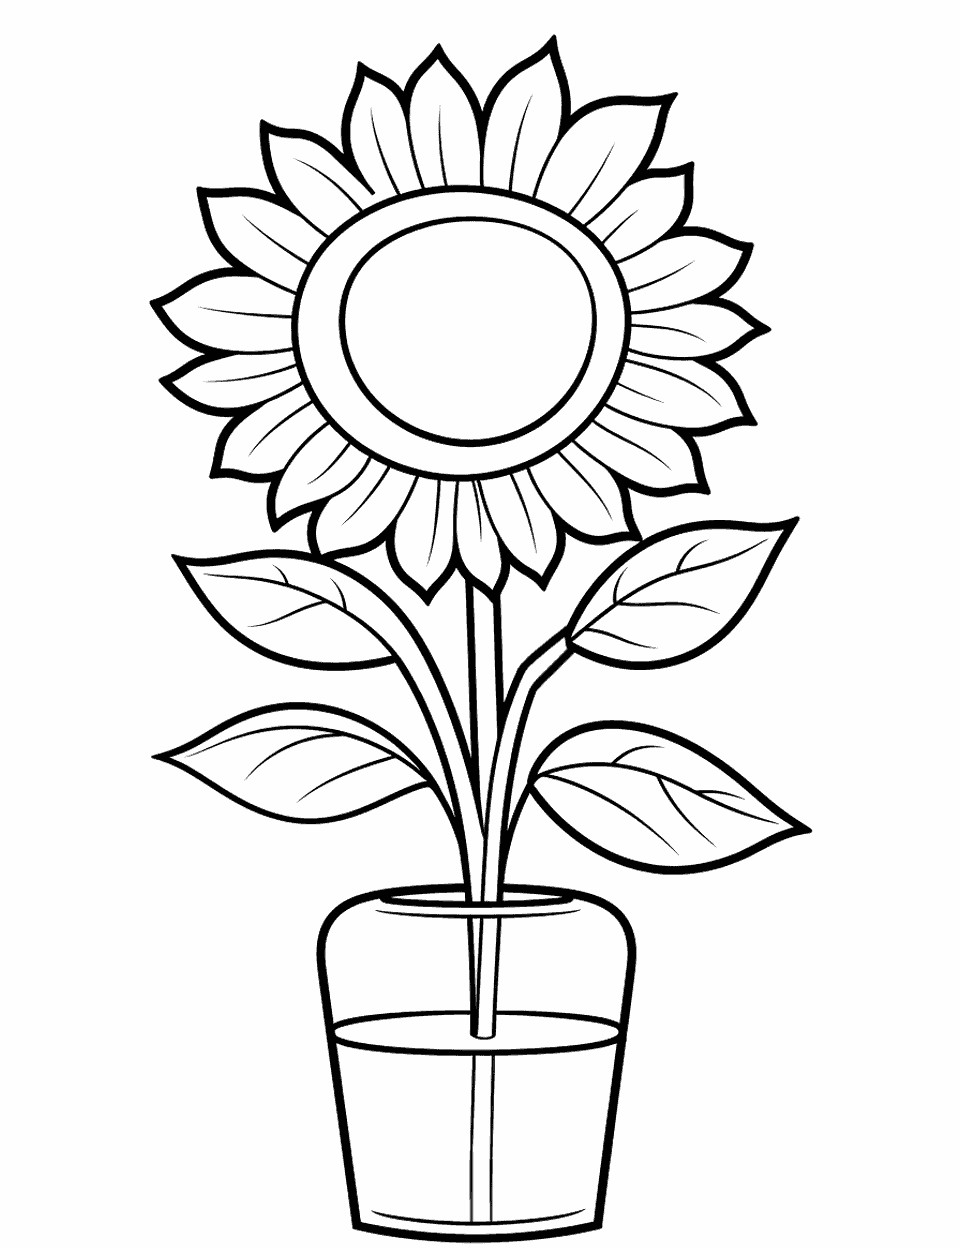 Sunflower in a Vase Coloring Page - A single sunflower in a vase.